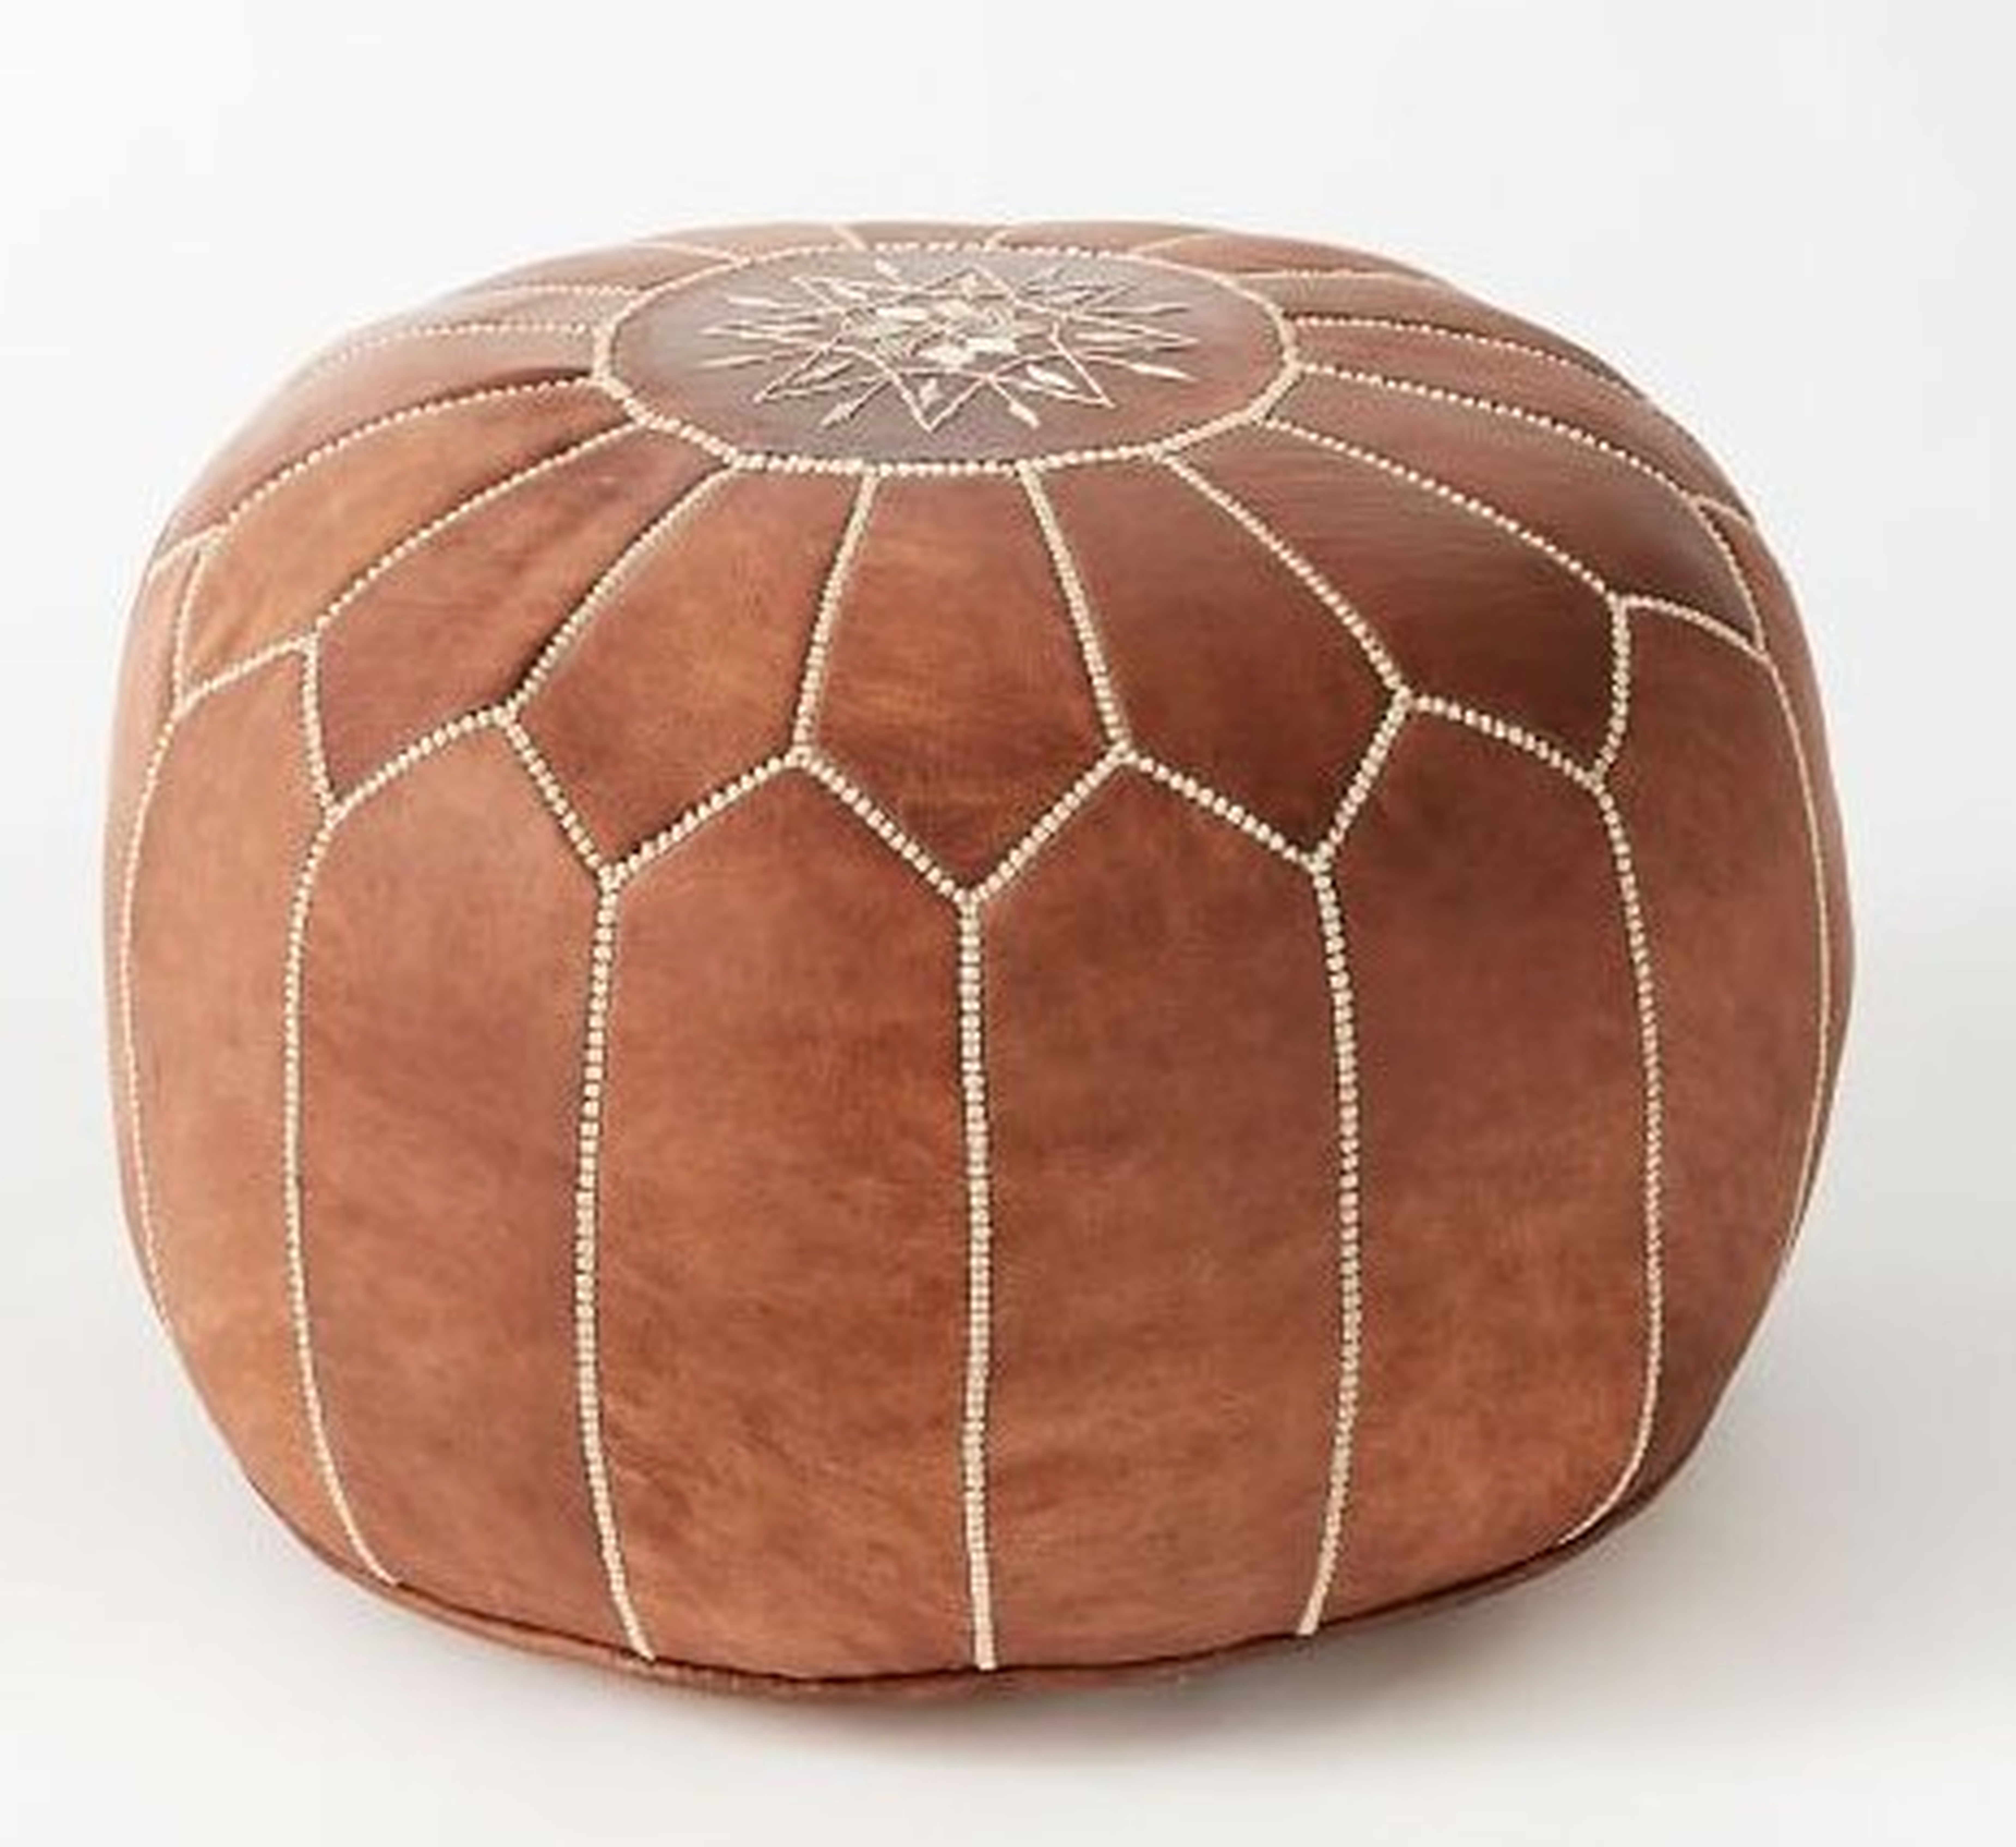 Leather Moroccan Pouf, Tan - West Elm